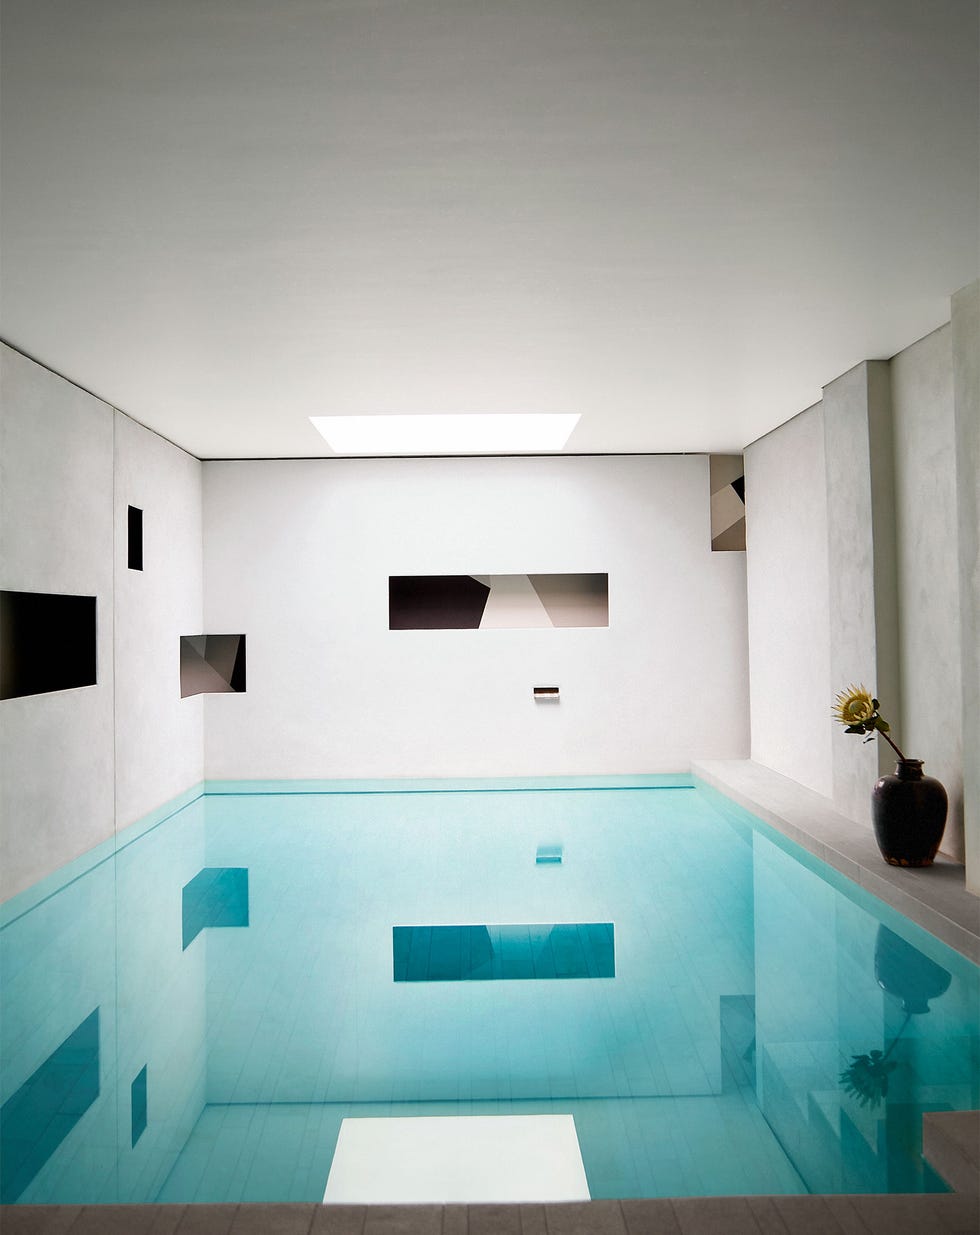 in a basement is a full room pool made with beige tiles on sides and bottom, walls have zero edges opening to a black and white fresco, a vase with a sunflower is against the wall, and a skylight is above